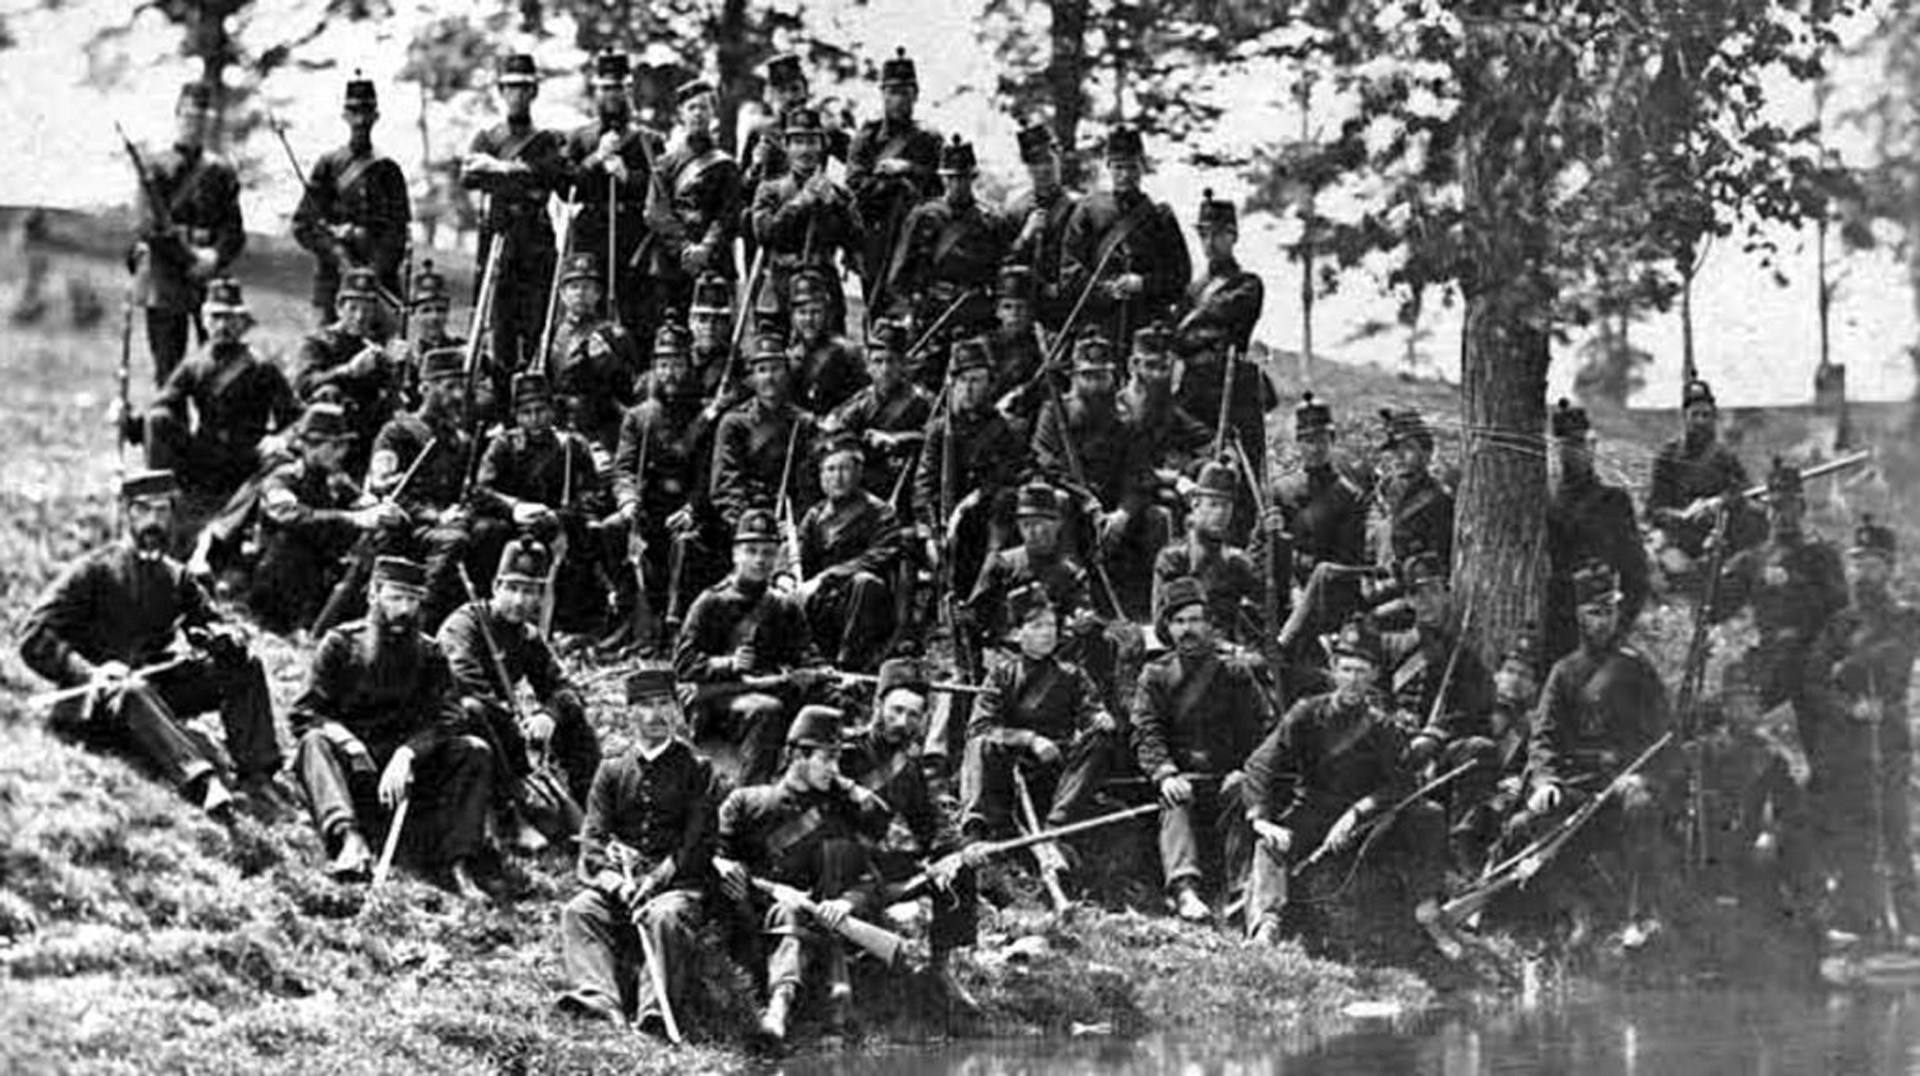 Members of Number 5 Company, Queen’s Own Rifles (2d Battalion, Canadian Militia) pose after the Battle of Ridgeway. The unit’s founder, Lieutenant Colonel William Smith Drurie, may be the officer (with the mustache and side whiskers) seated between the two surviving company officers. At the time, Drurie was the Assistant Adjutant General for Canada.  Note the mix of Spencer rifles and carbines. Image courtesy of the Queen’s Own Rifles Museum.